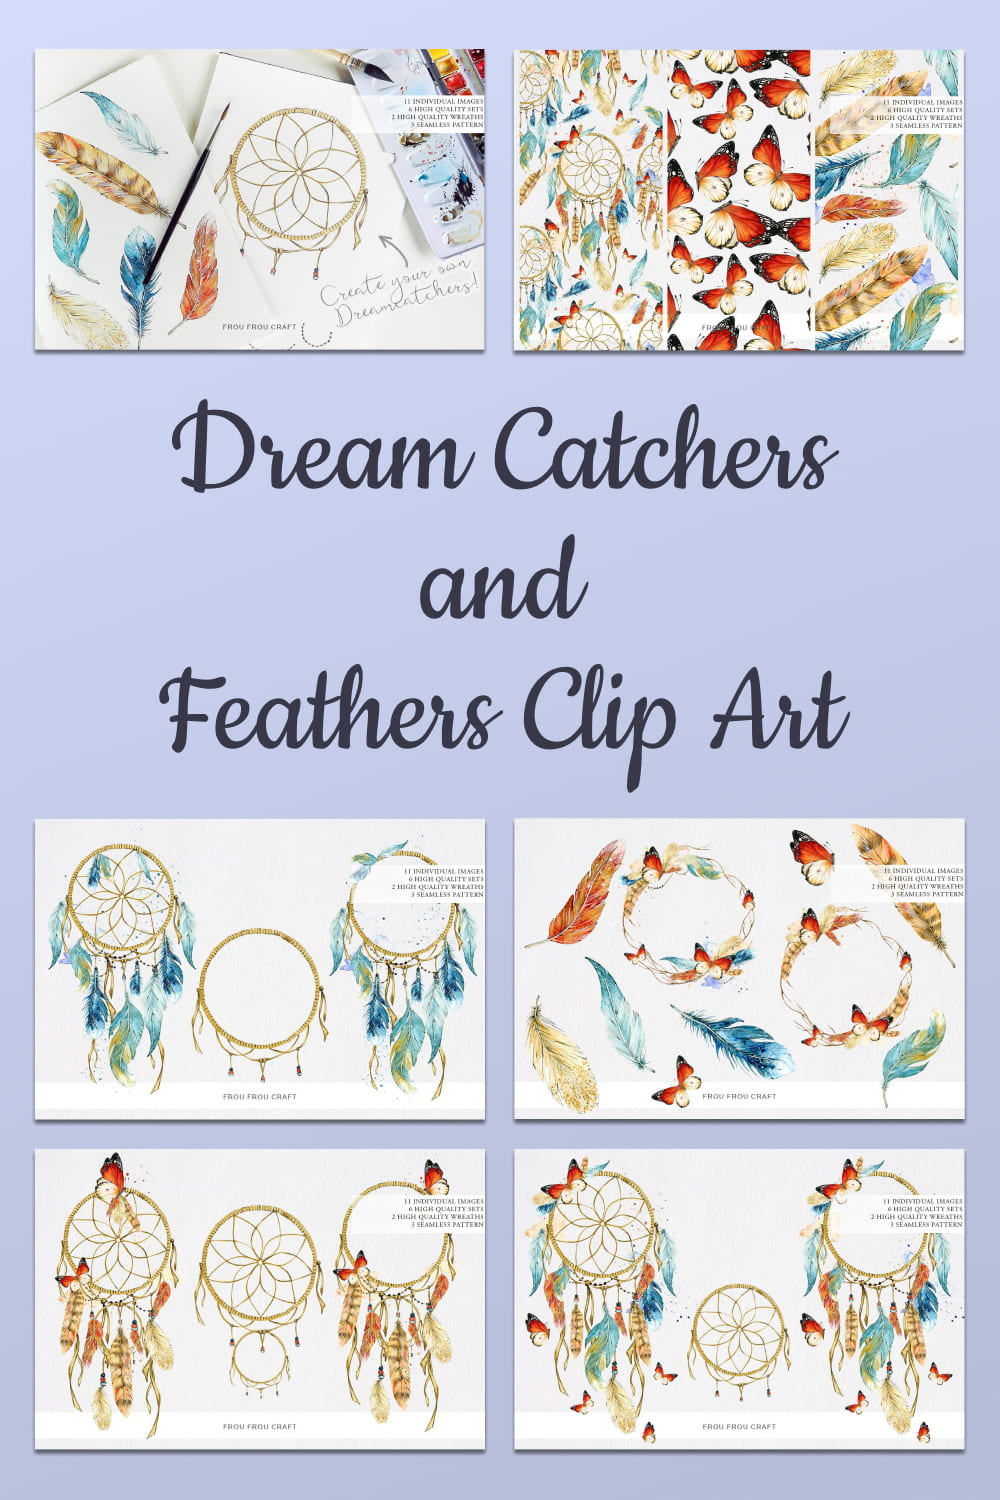 dream catchers and feathers illustrations.